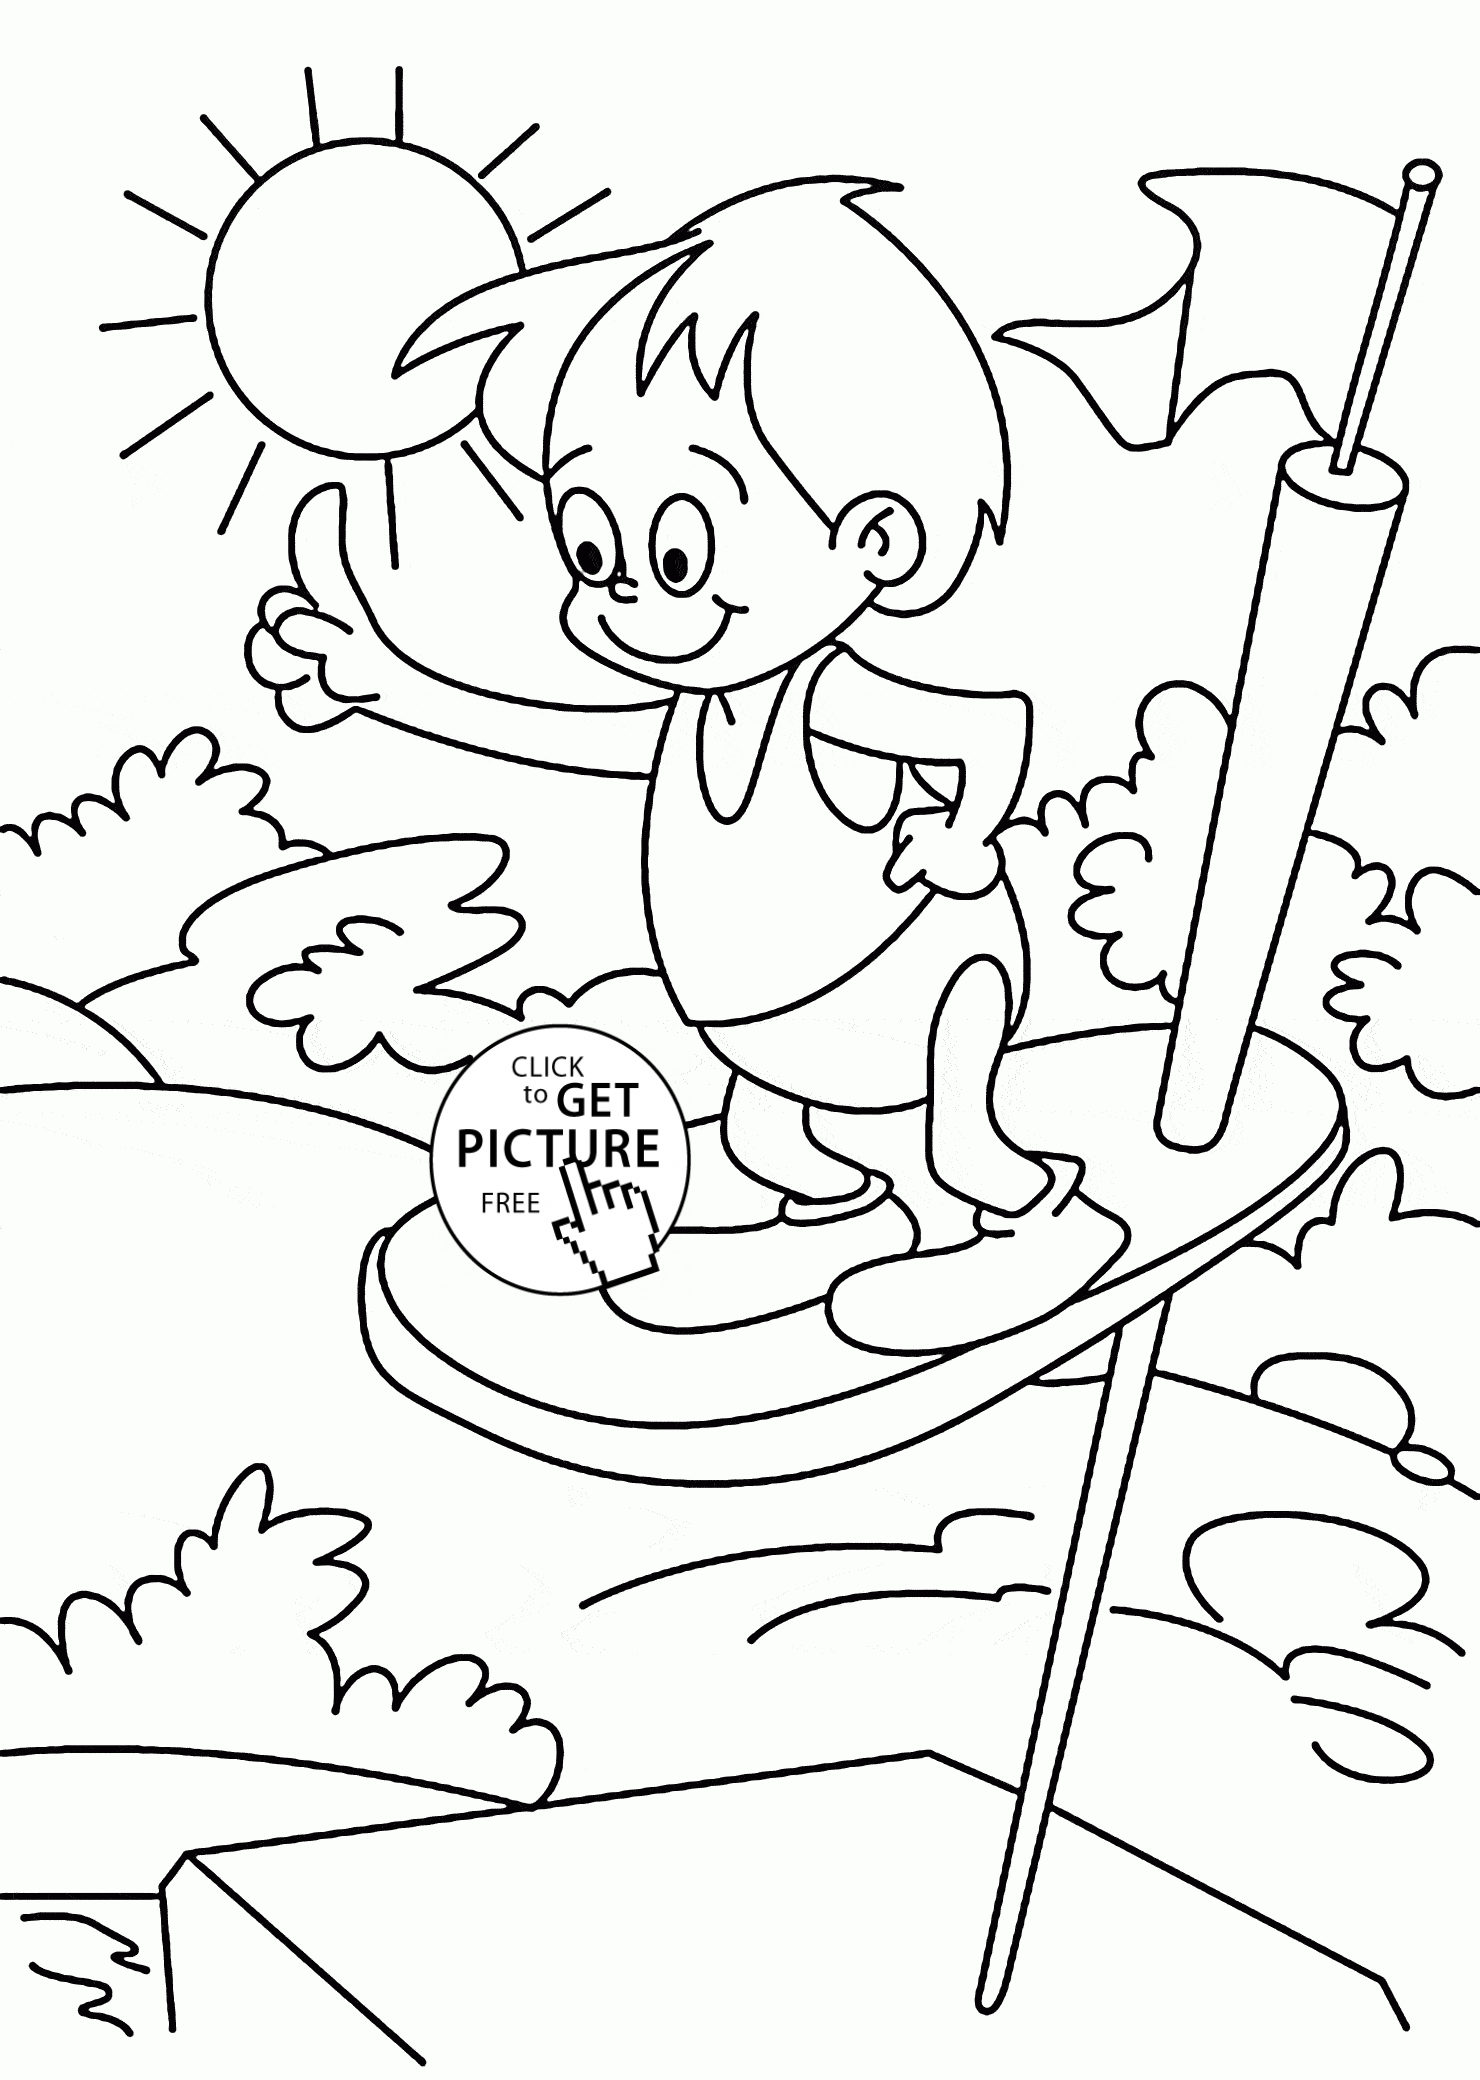 Summer swimming pool coloring page for kids seasons coloring pages printablesâ coloring pages pool drawing dinosaur coloring pages